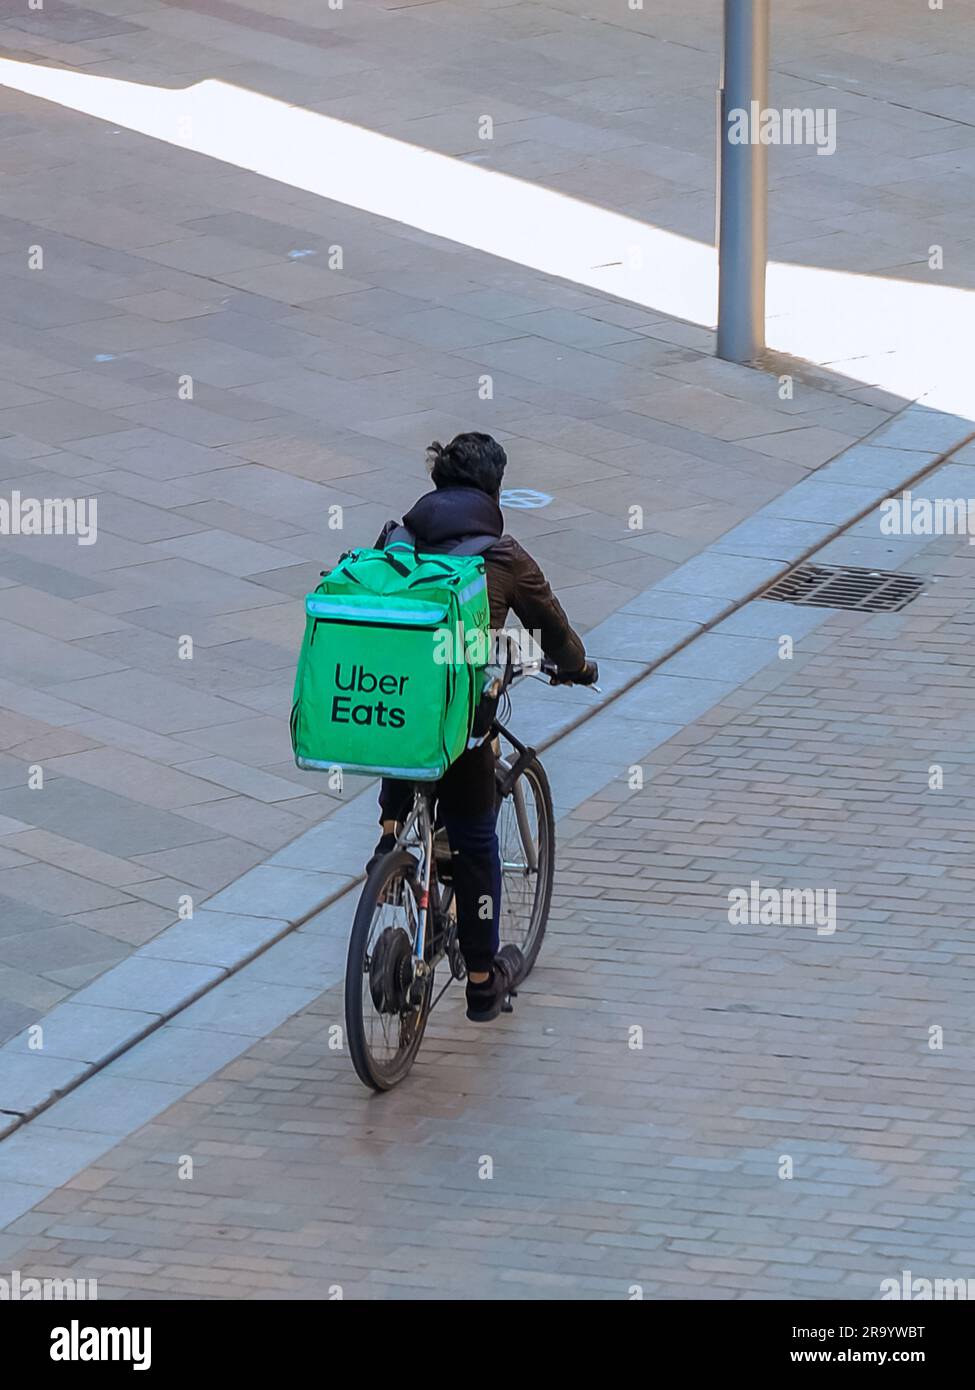 Mobile food delivery by cycle for Uber Eats.  Popular app which allows customers to order take away to their homes. Stock Photo